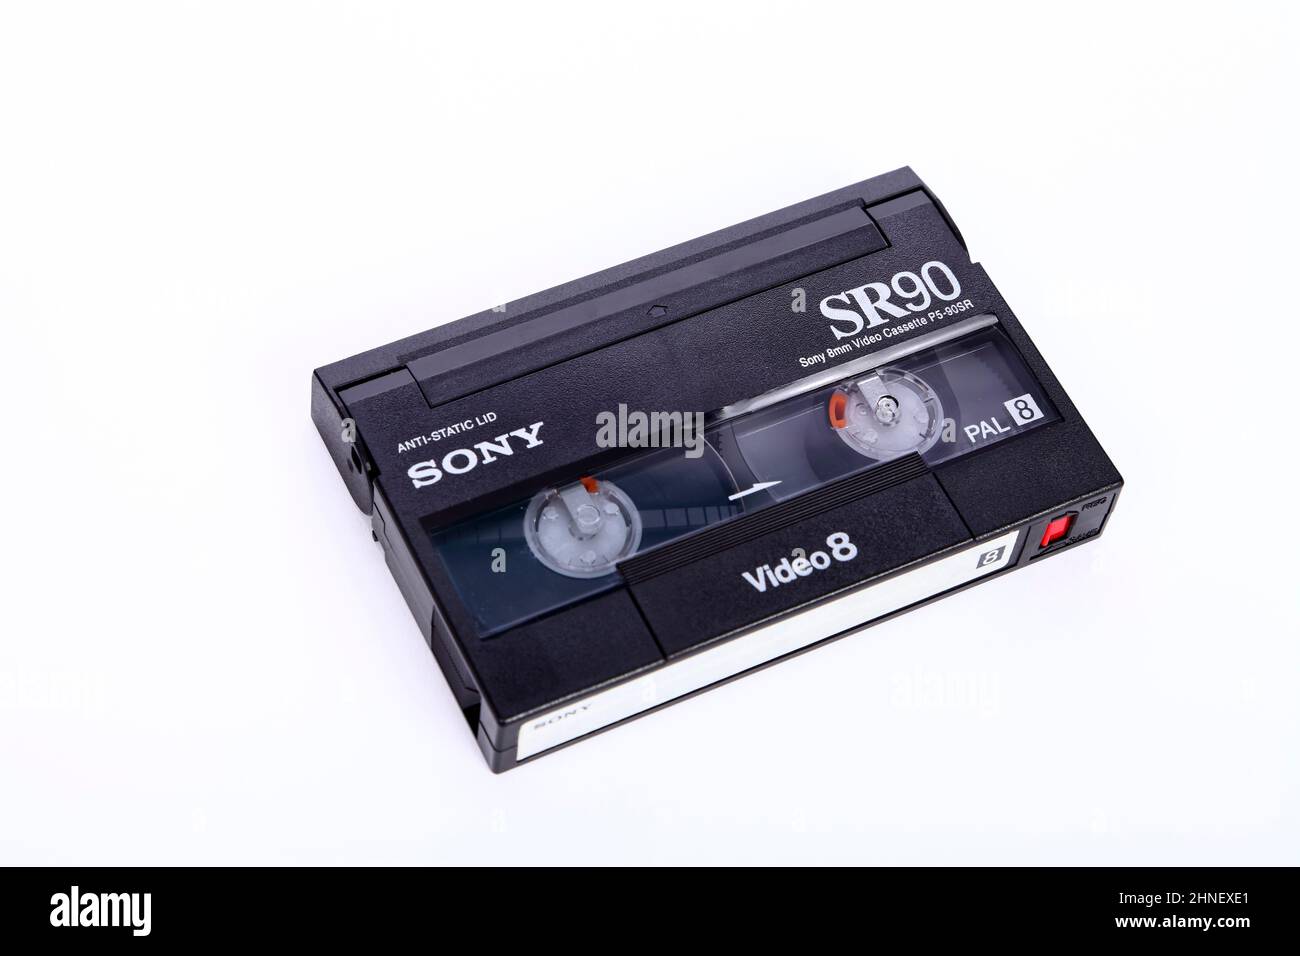 Video 8 compact camcorder cassette tape Stock Photo